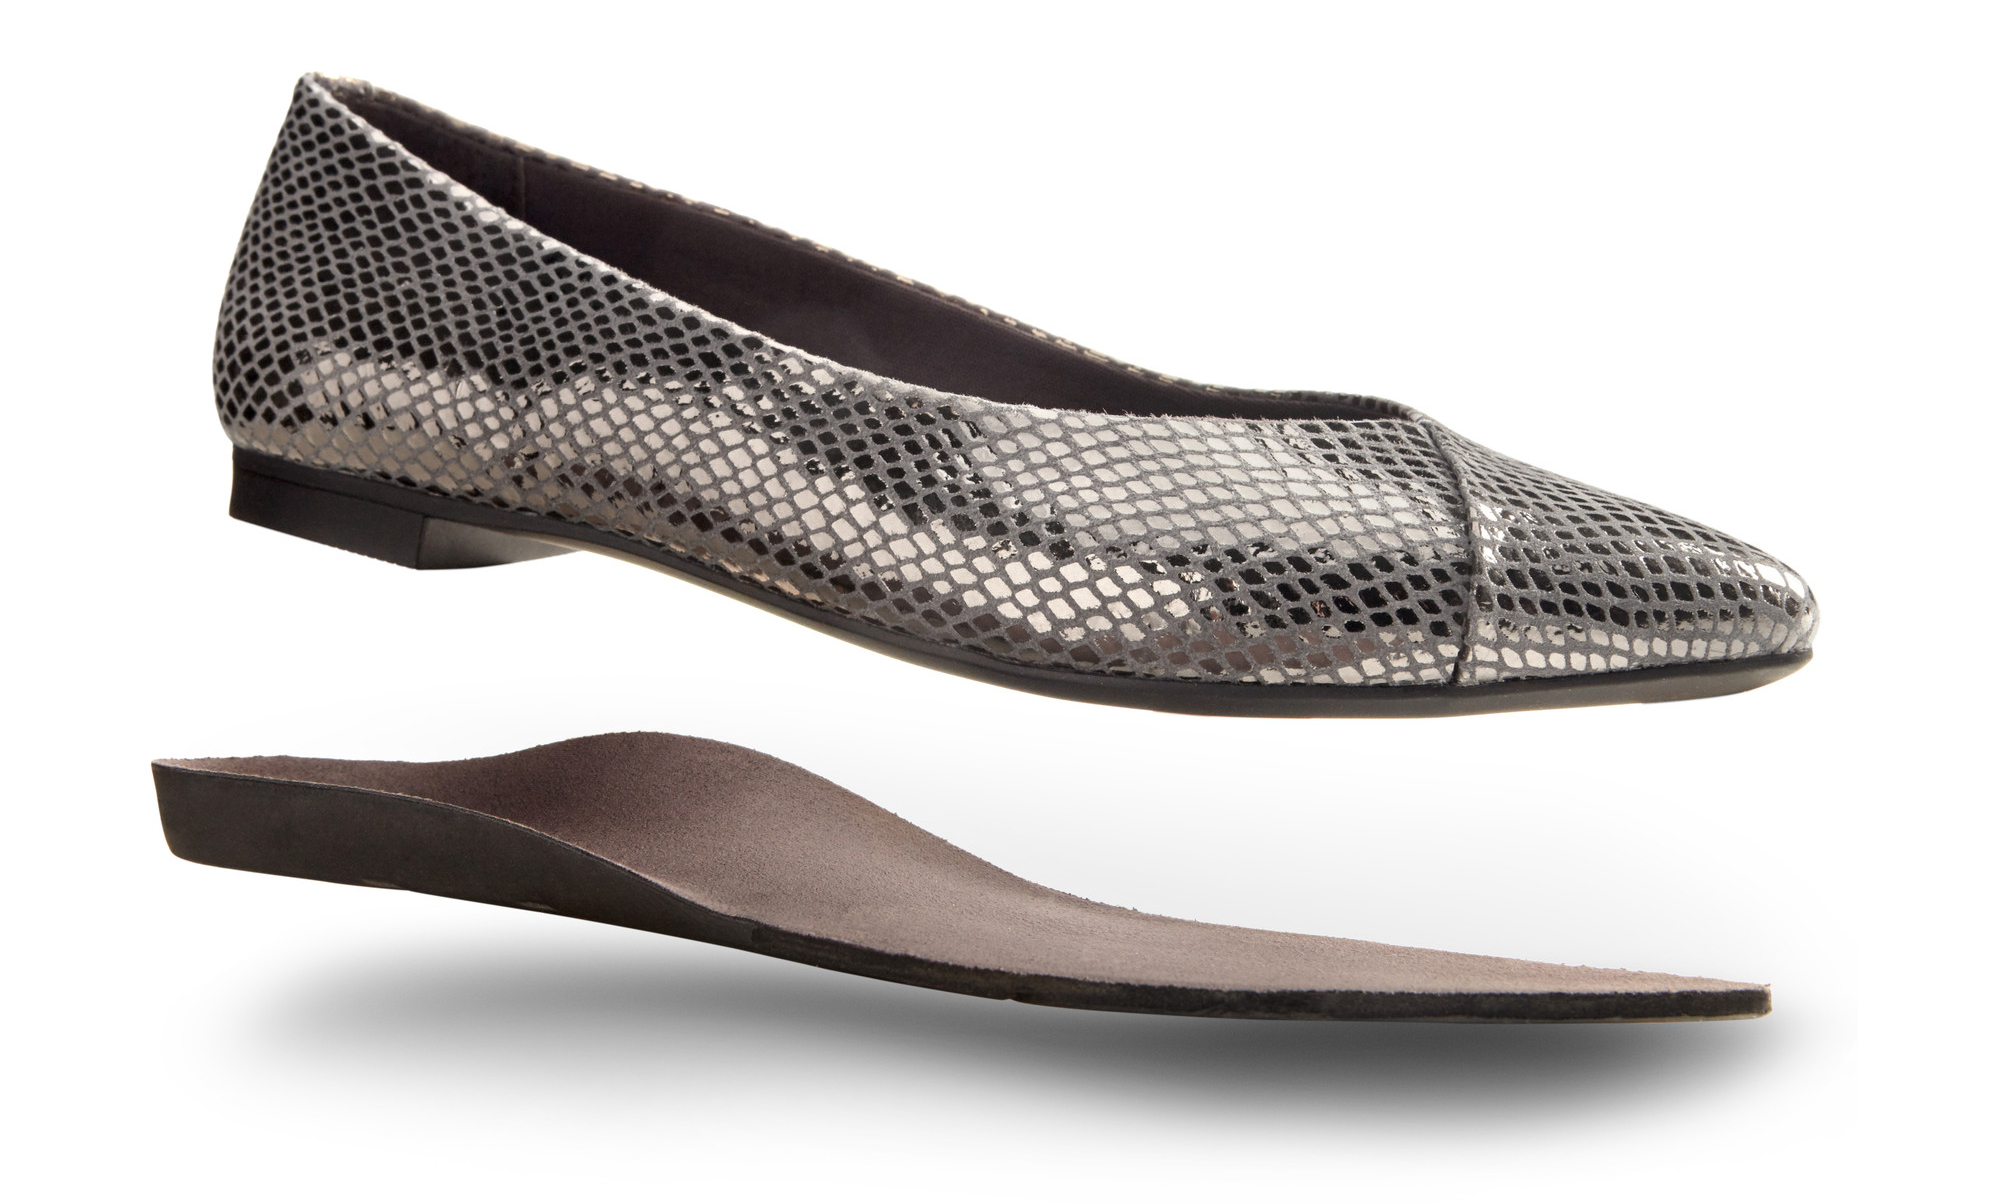 dress flat shoes with arch support